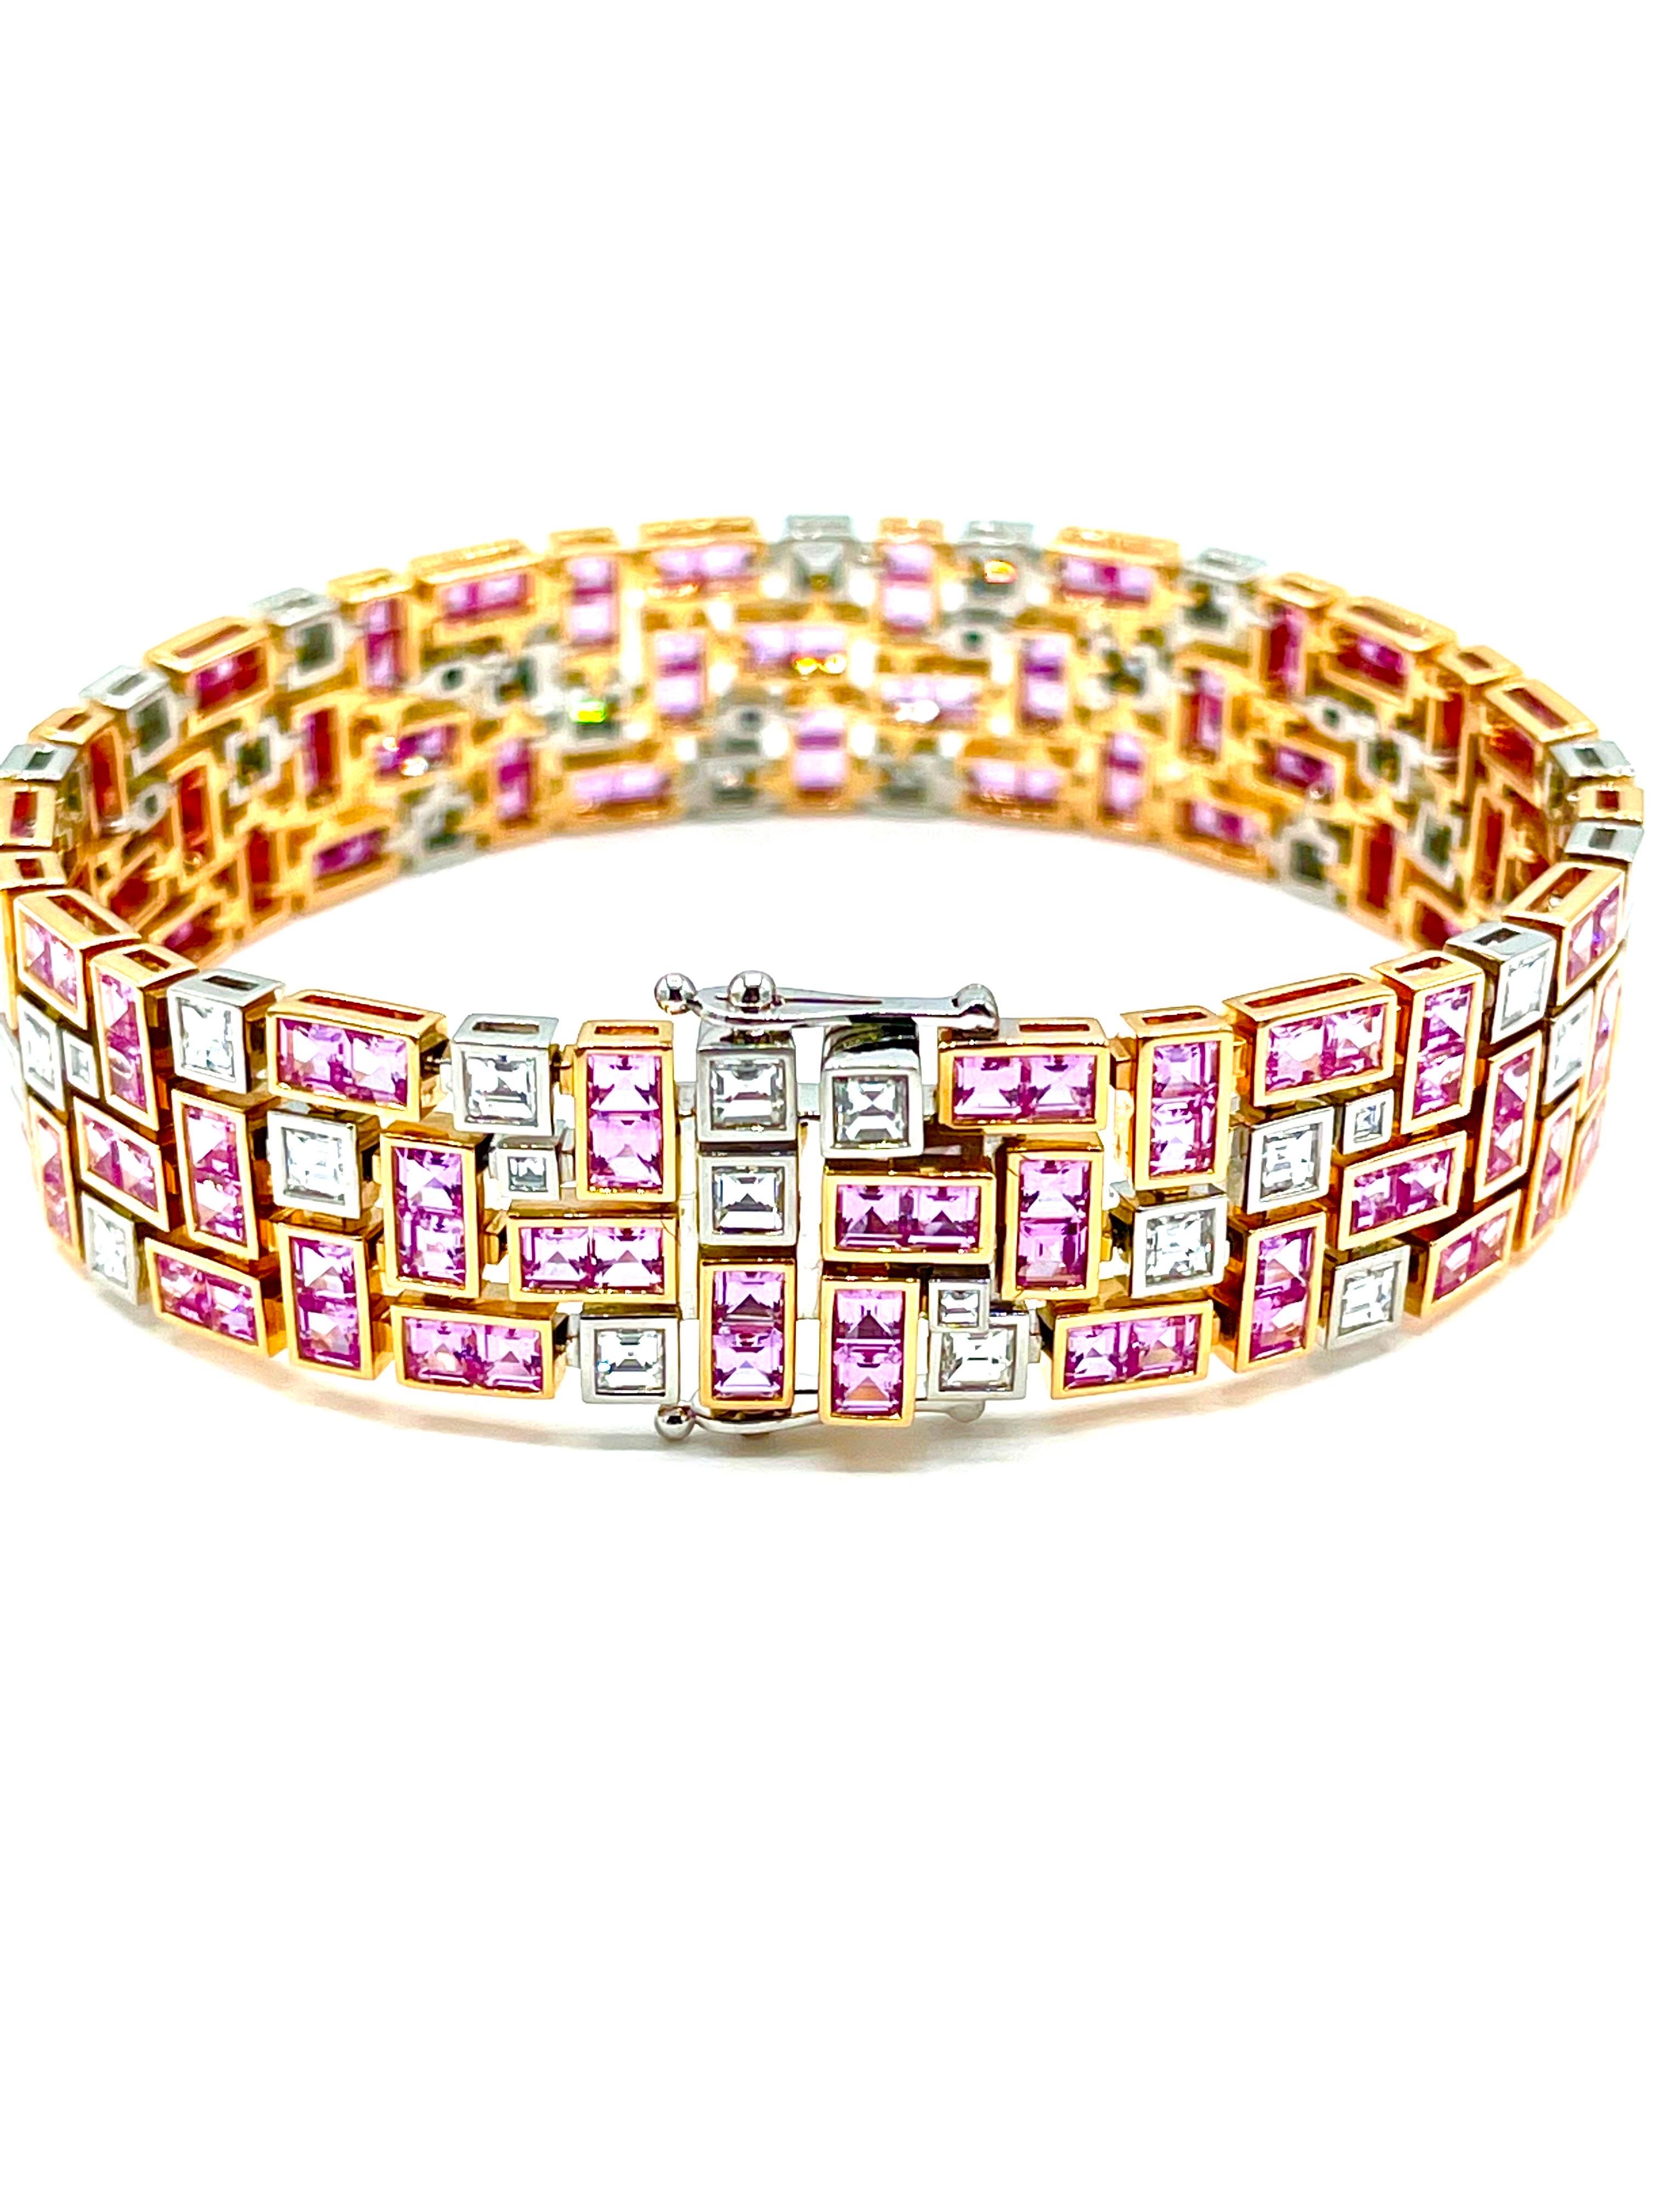 An amazing handcrafted work of art!  This Masterpiece bracelet, designed by Robert Procop, features 146 square cut pink Sapphires, set in 18K rose gold, with a total weight of 13.97 carats.  The Sapphires are off set with square cut Diamonds set in